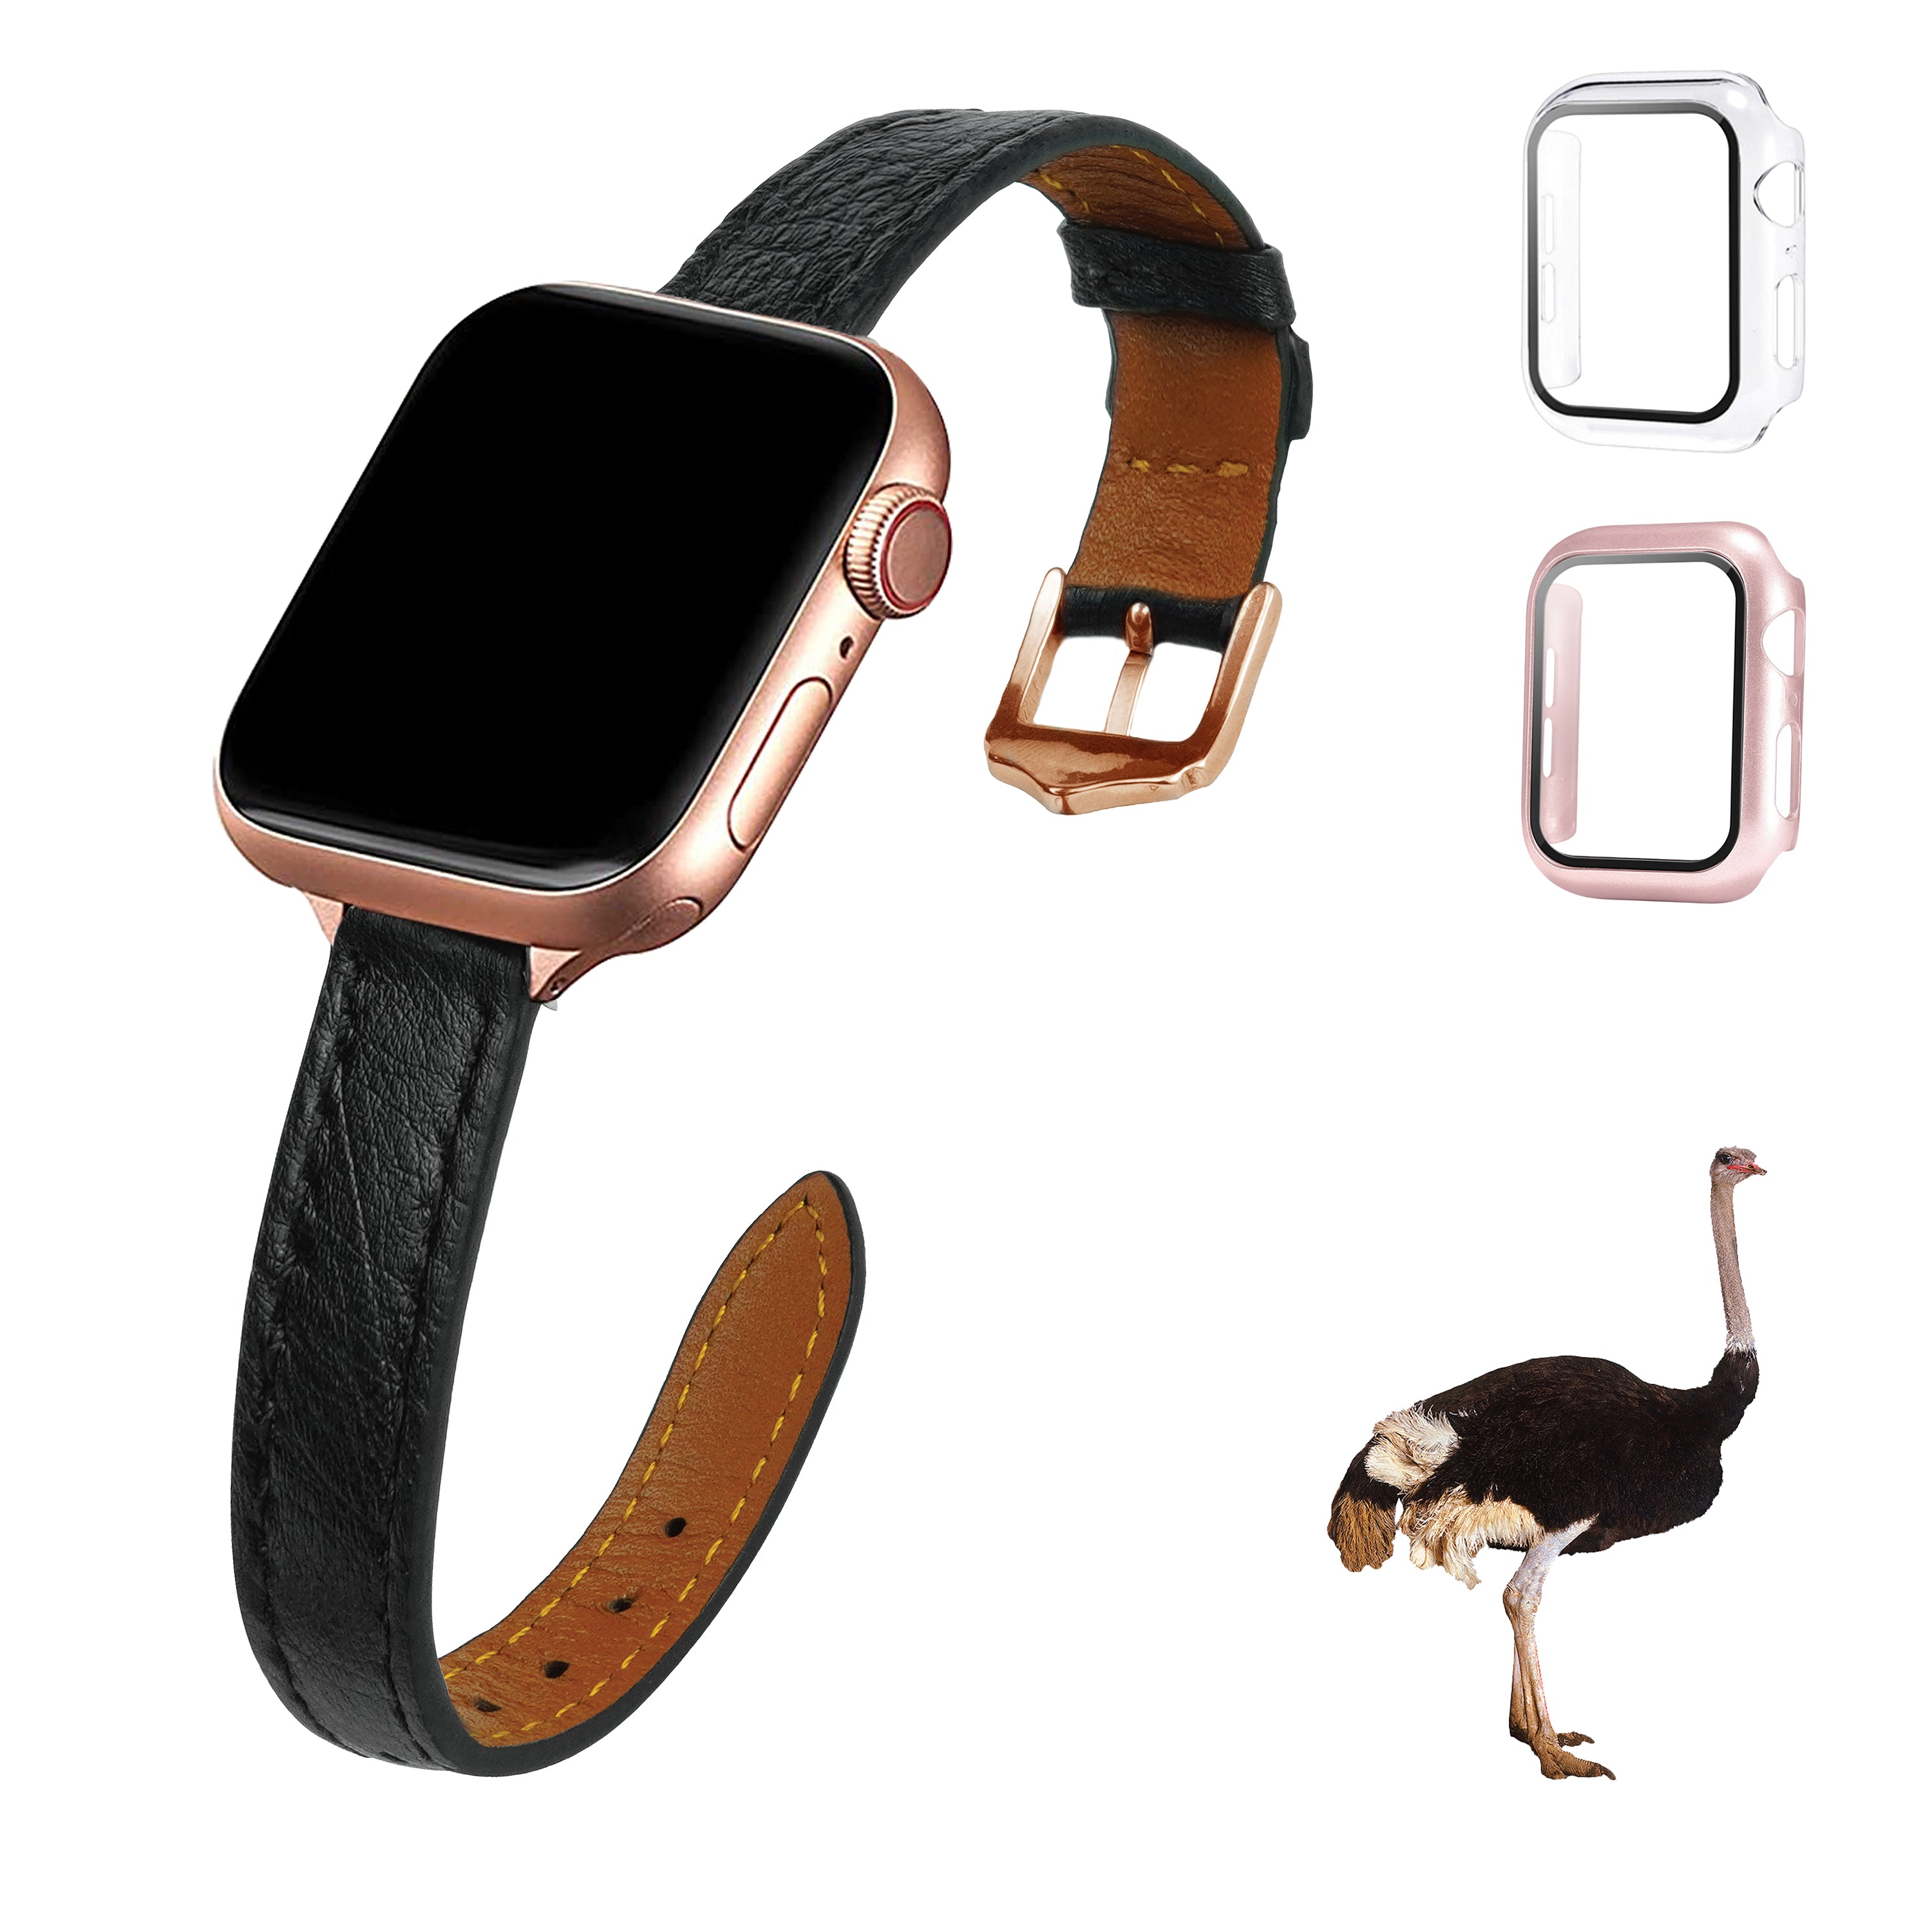 Black Flat Ostrich Leather Band Compatible Apple Watch Iwatch 44mm Screen Protector Case Gold Adapter Replacement Strap For Smartwatch Series 4 5 6 SE Leather Handmade AW-181G-W-44MM